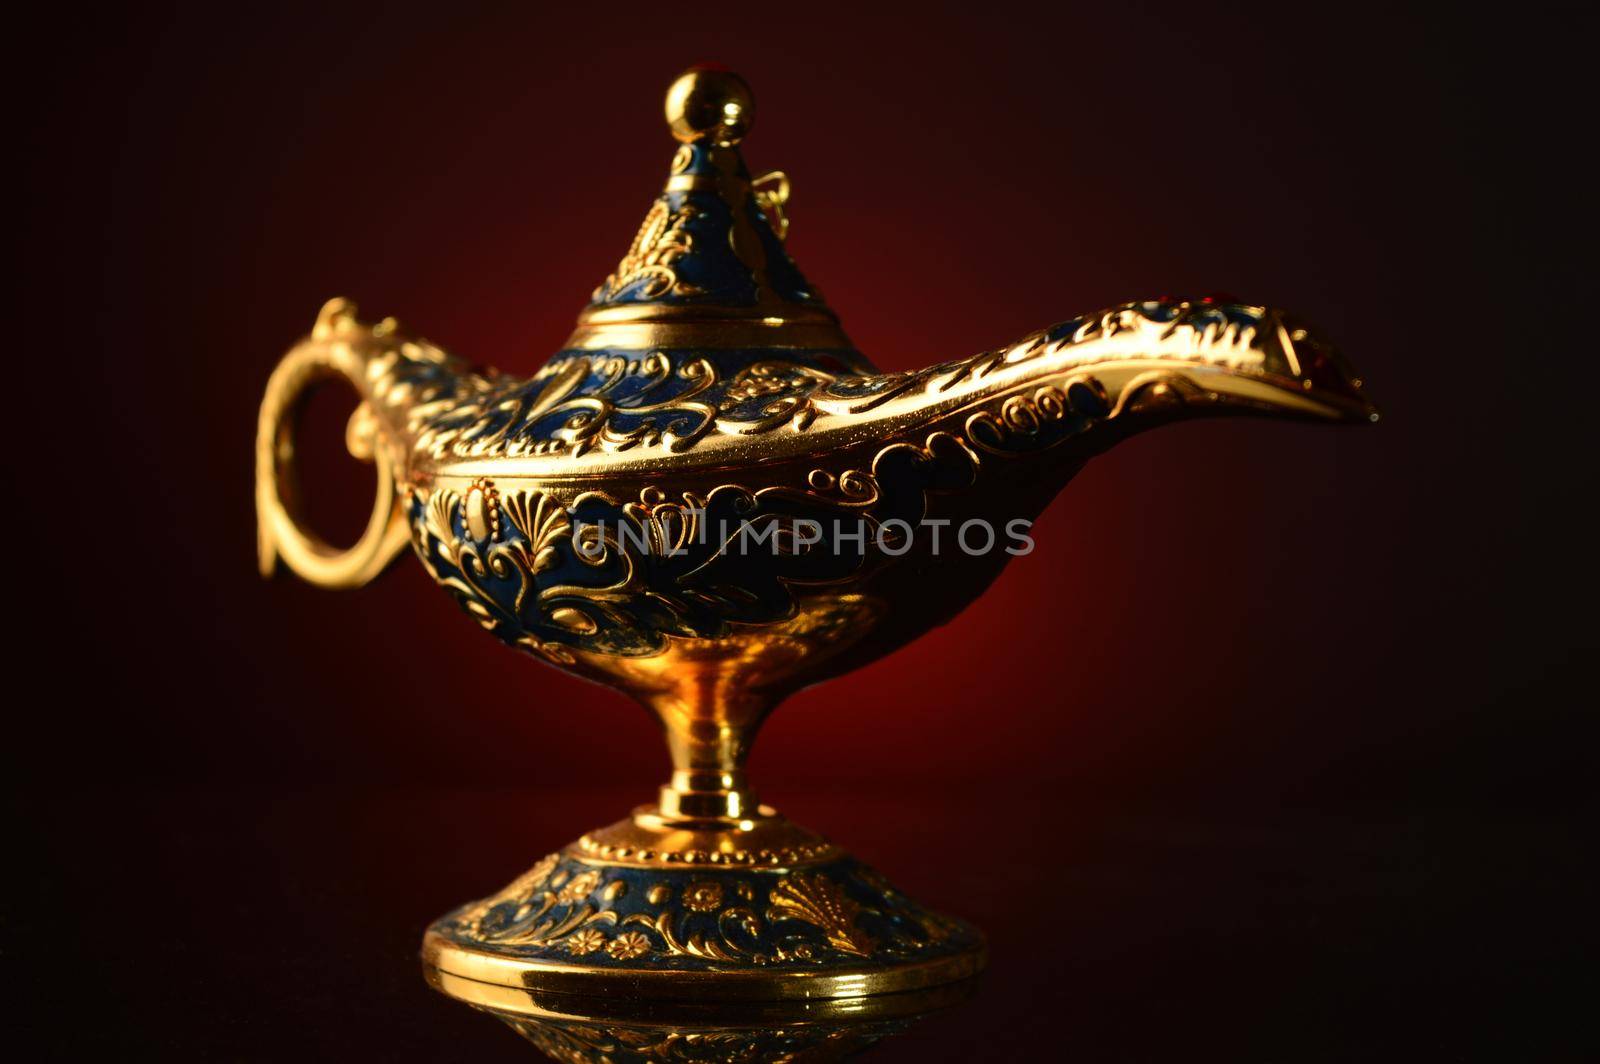 A magical ornate brass oil lamp over an atmospheric red and black gradient background.